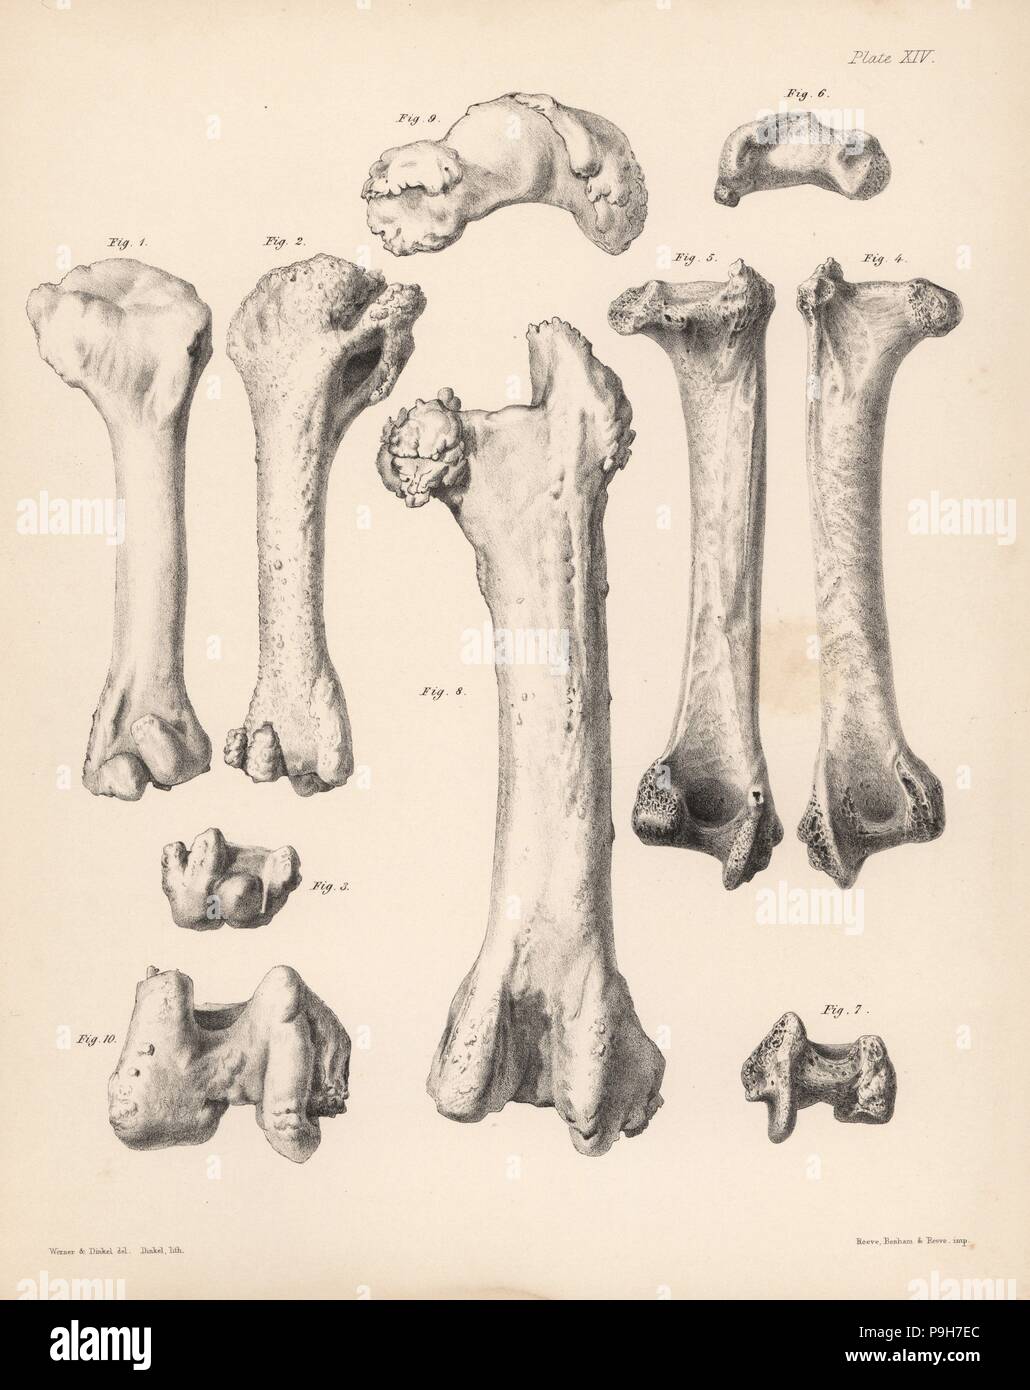 Humerus and femur of the extinct Rodrigues solitaire, Pezophaps solitaria, in the Parisian Collection and Andersonian Collection. Lithograph by Joseph Dinkel after Werner and Dinkel from Hugh Edwin Strickland and Alexander Gordon Melville's The Dodo and its Kindred, London, Reeve, Benham and Reeve, 1848. Stock Photo